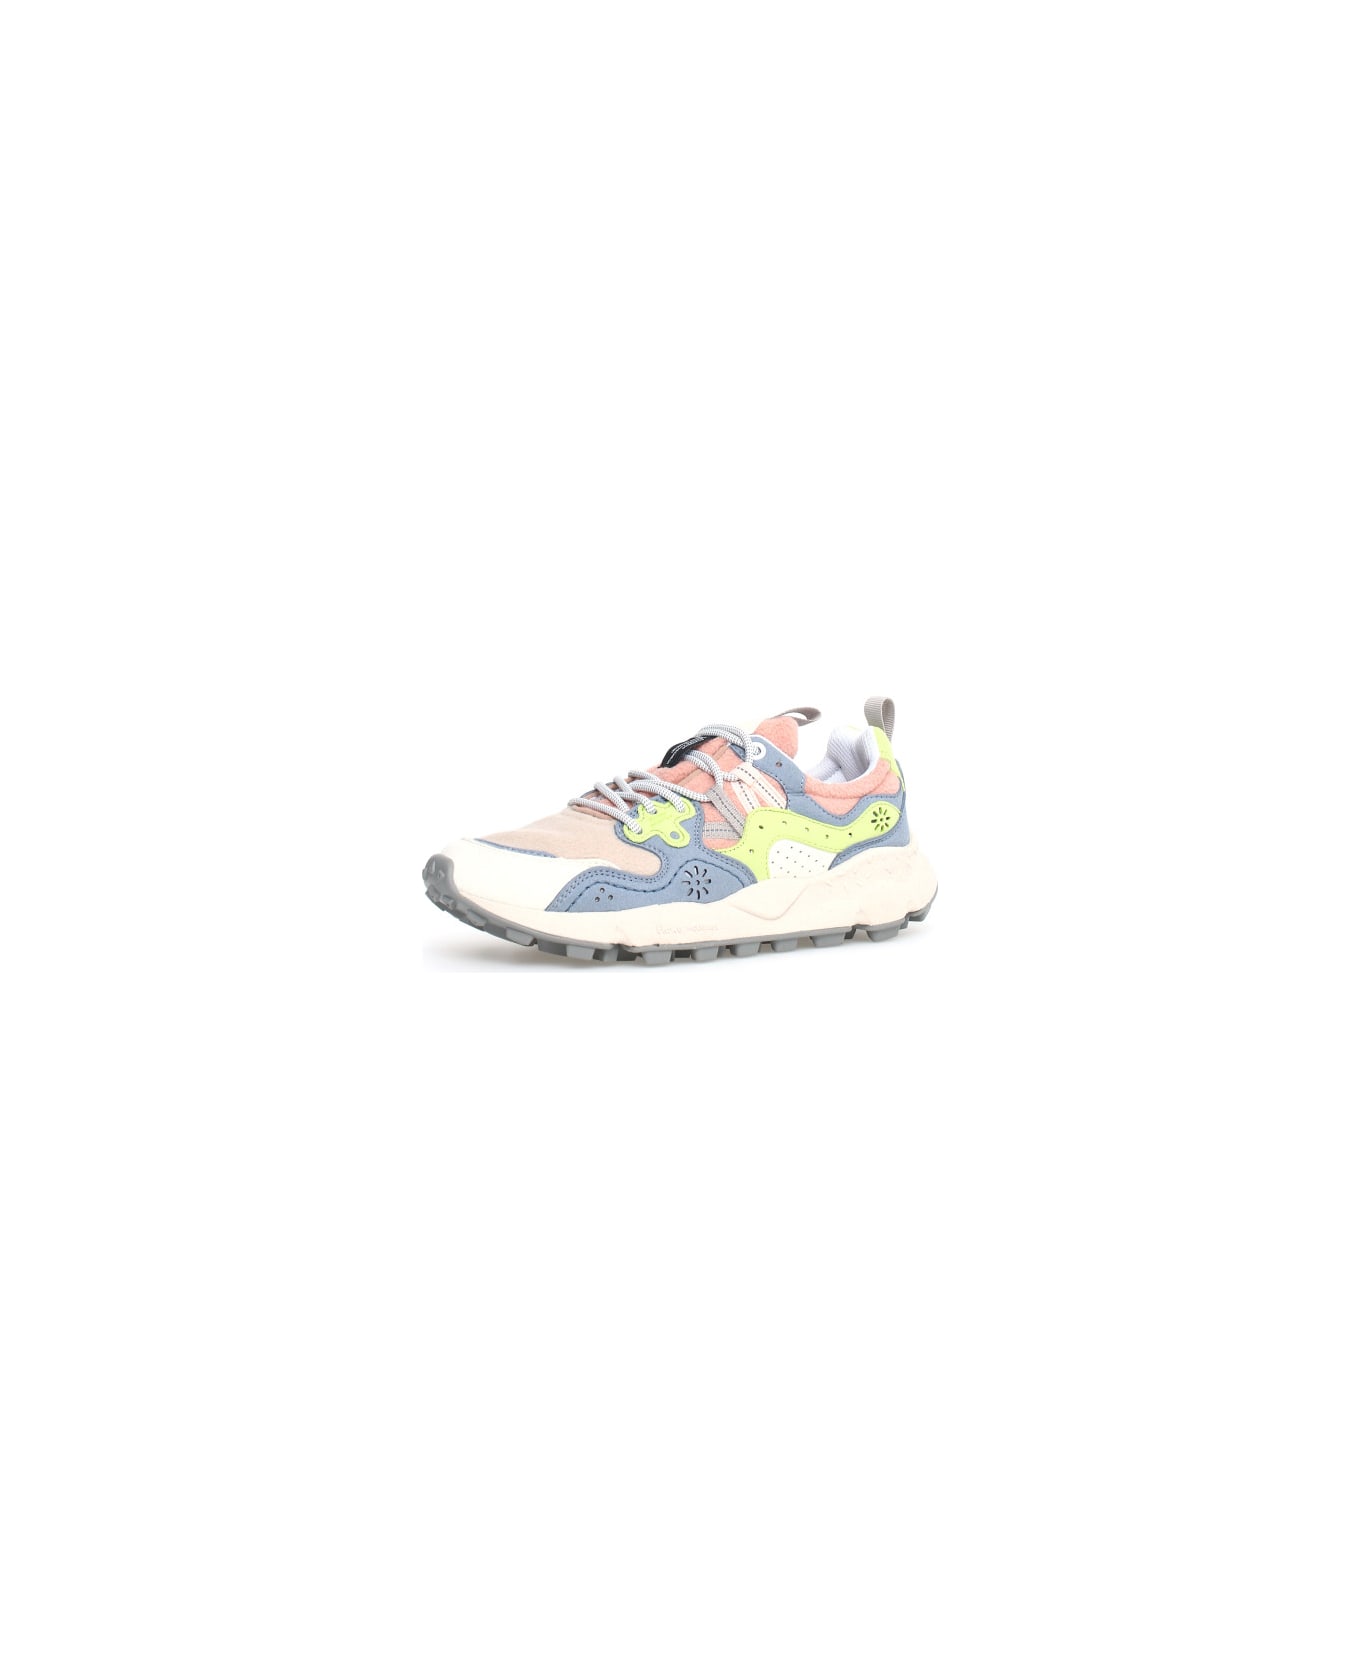 Flower Mountain Sneakers Yamano 3 - Multicolor